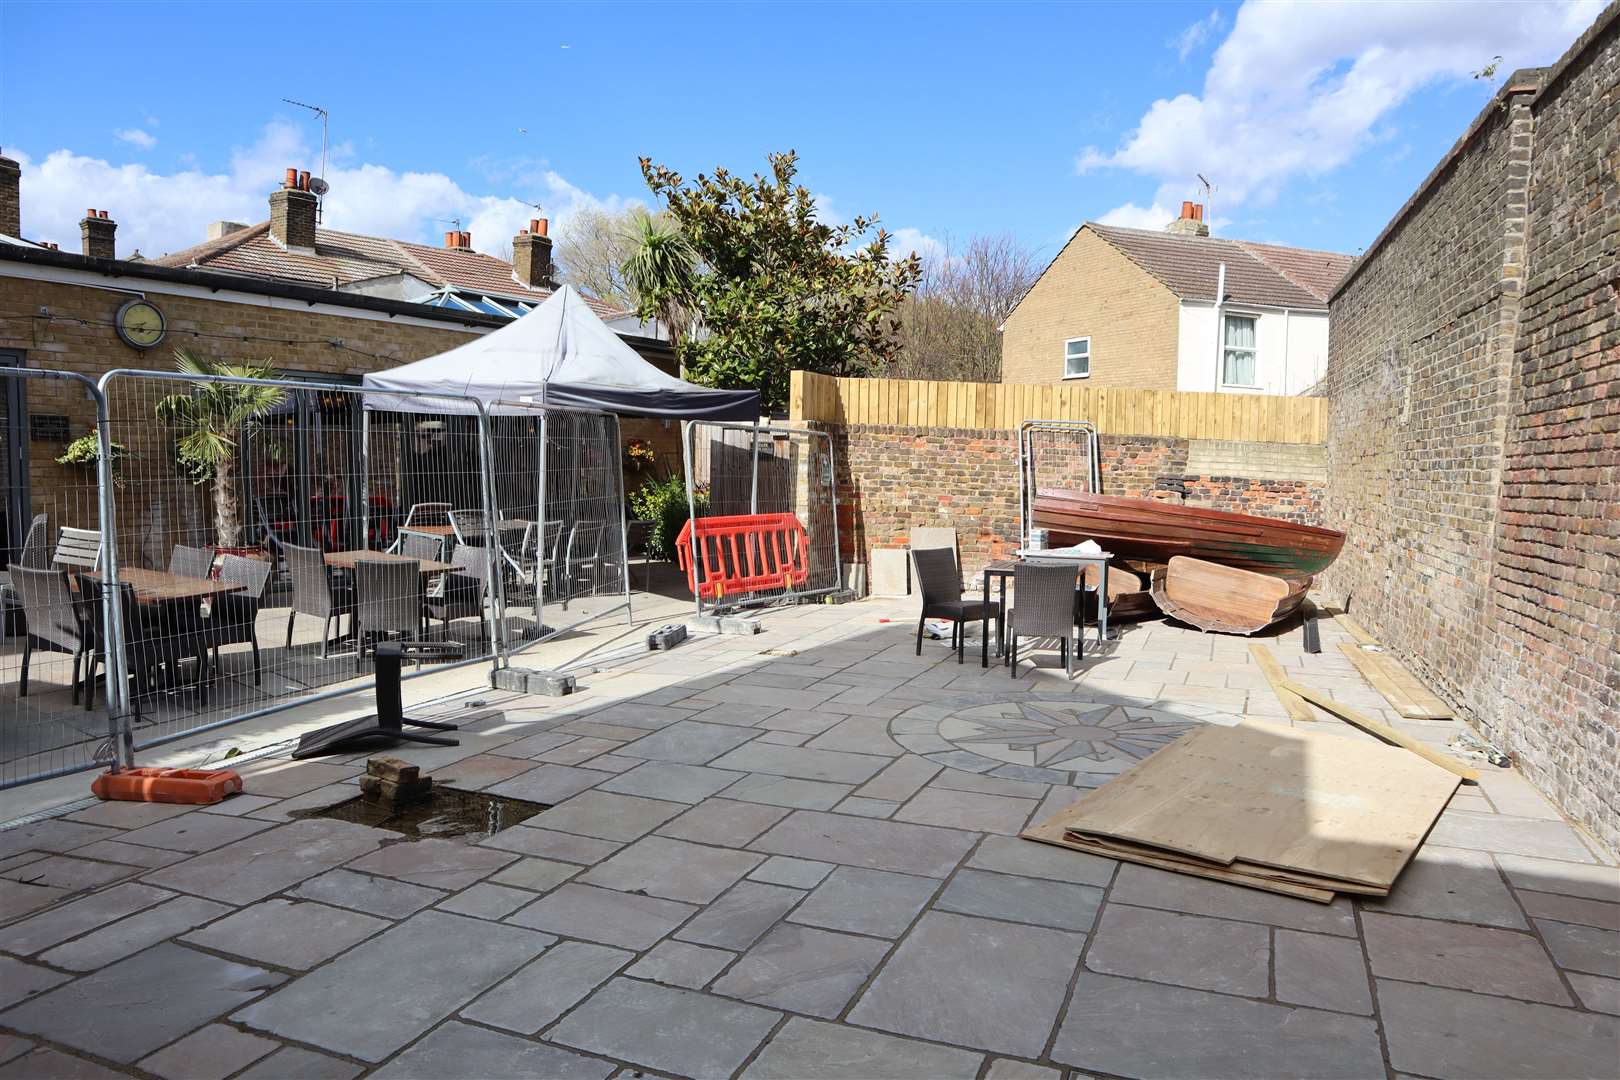 Work on the garden extension taking shape at the Belle and Lion pub in Sheerness High Street